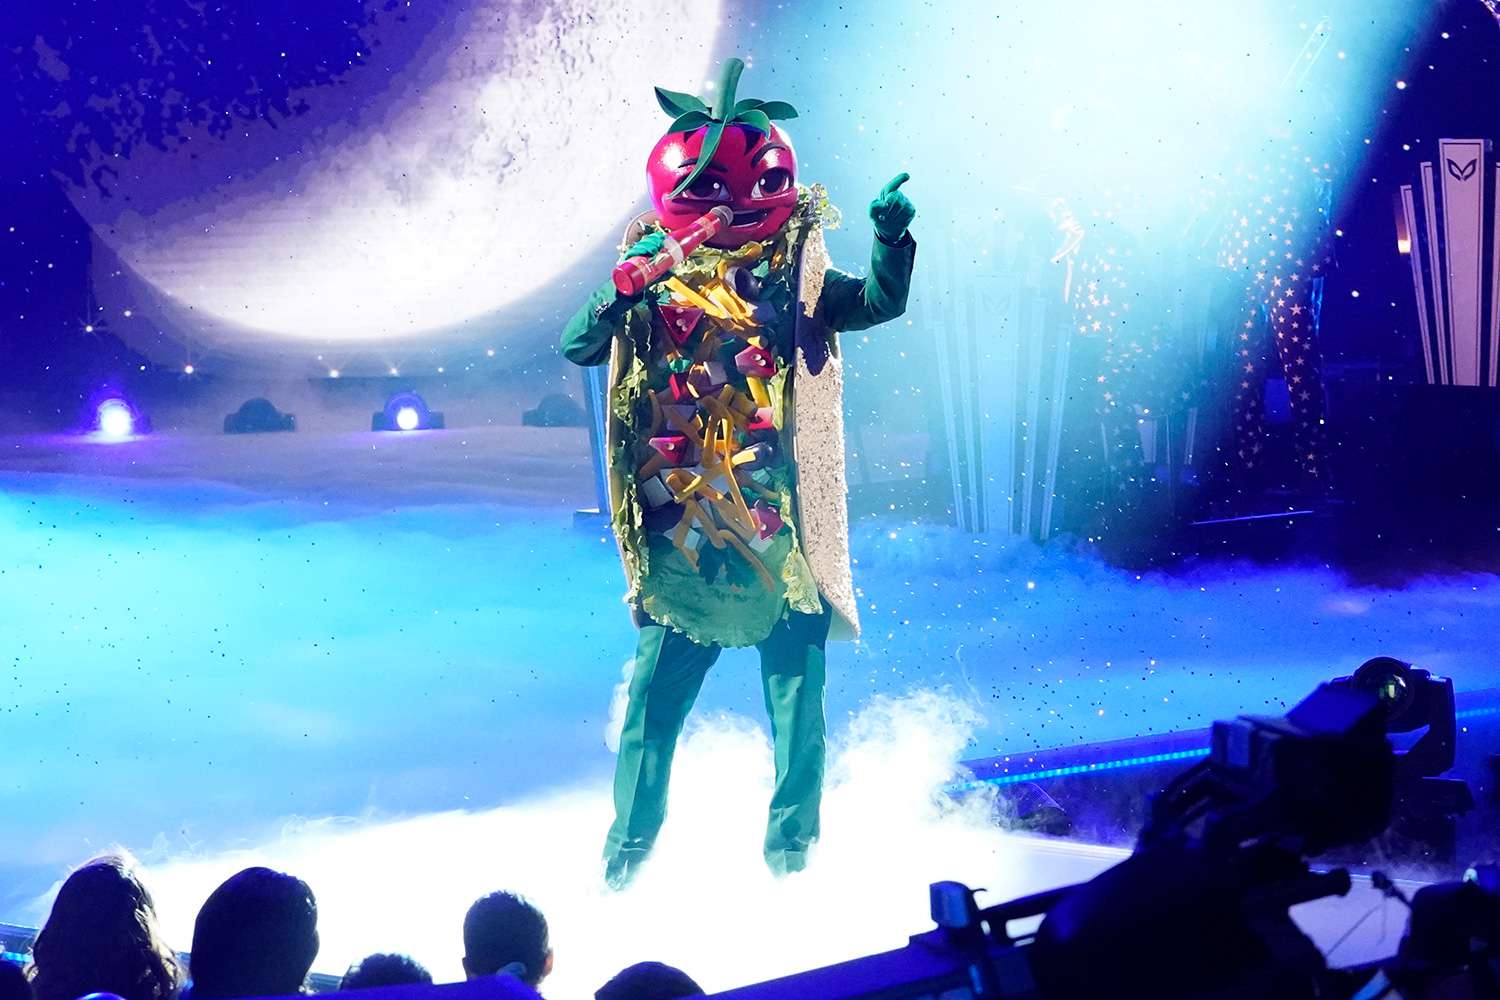 THE MASKED SINGER: The Taco in the &ldquo;A Brand New Six Pack: Group B Kickoff!&rdquo;